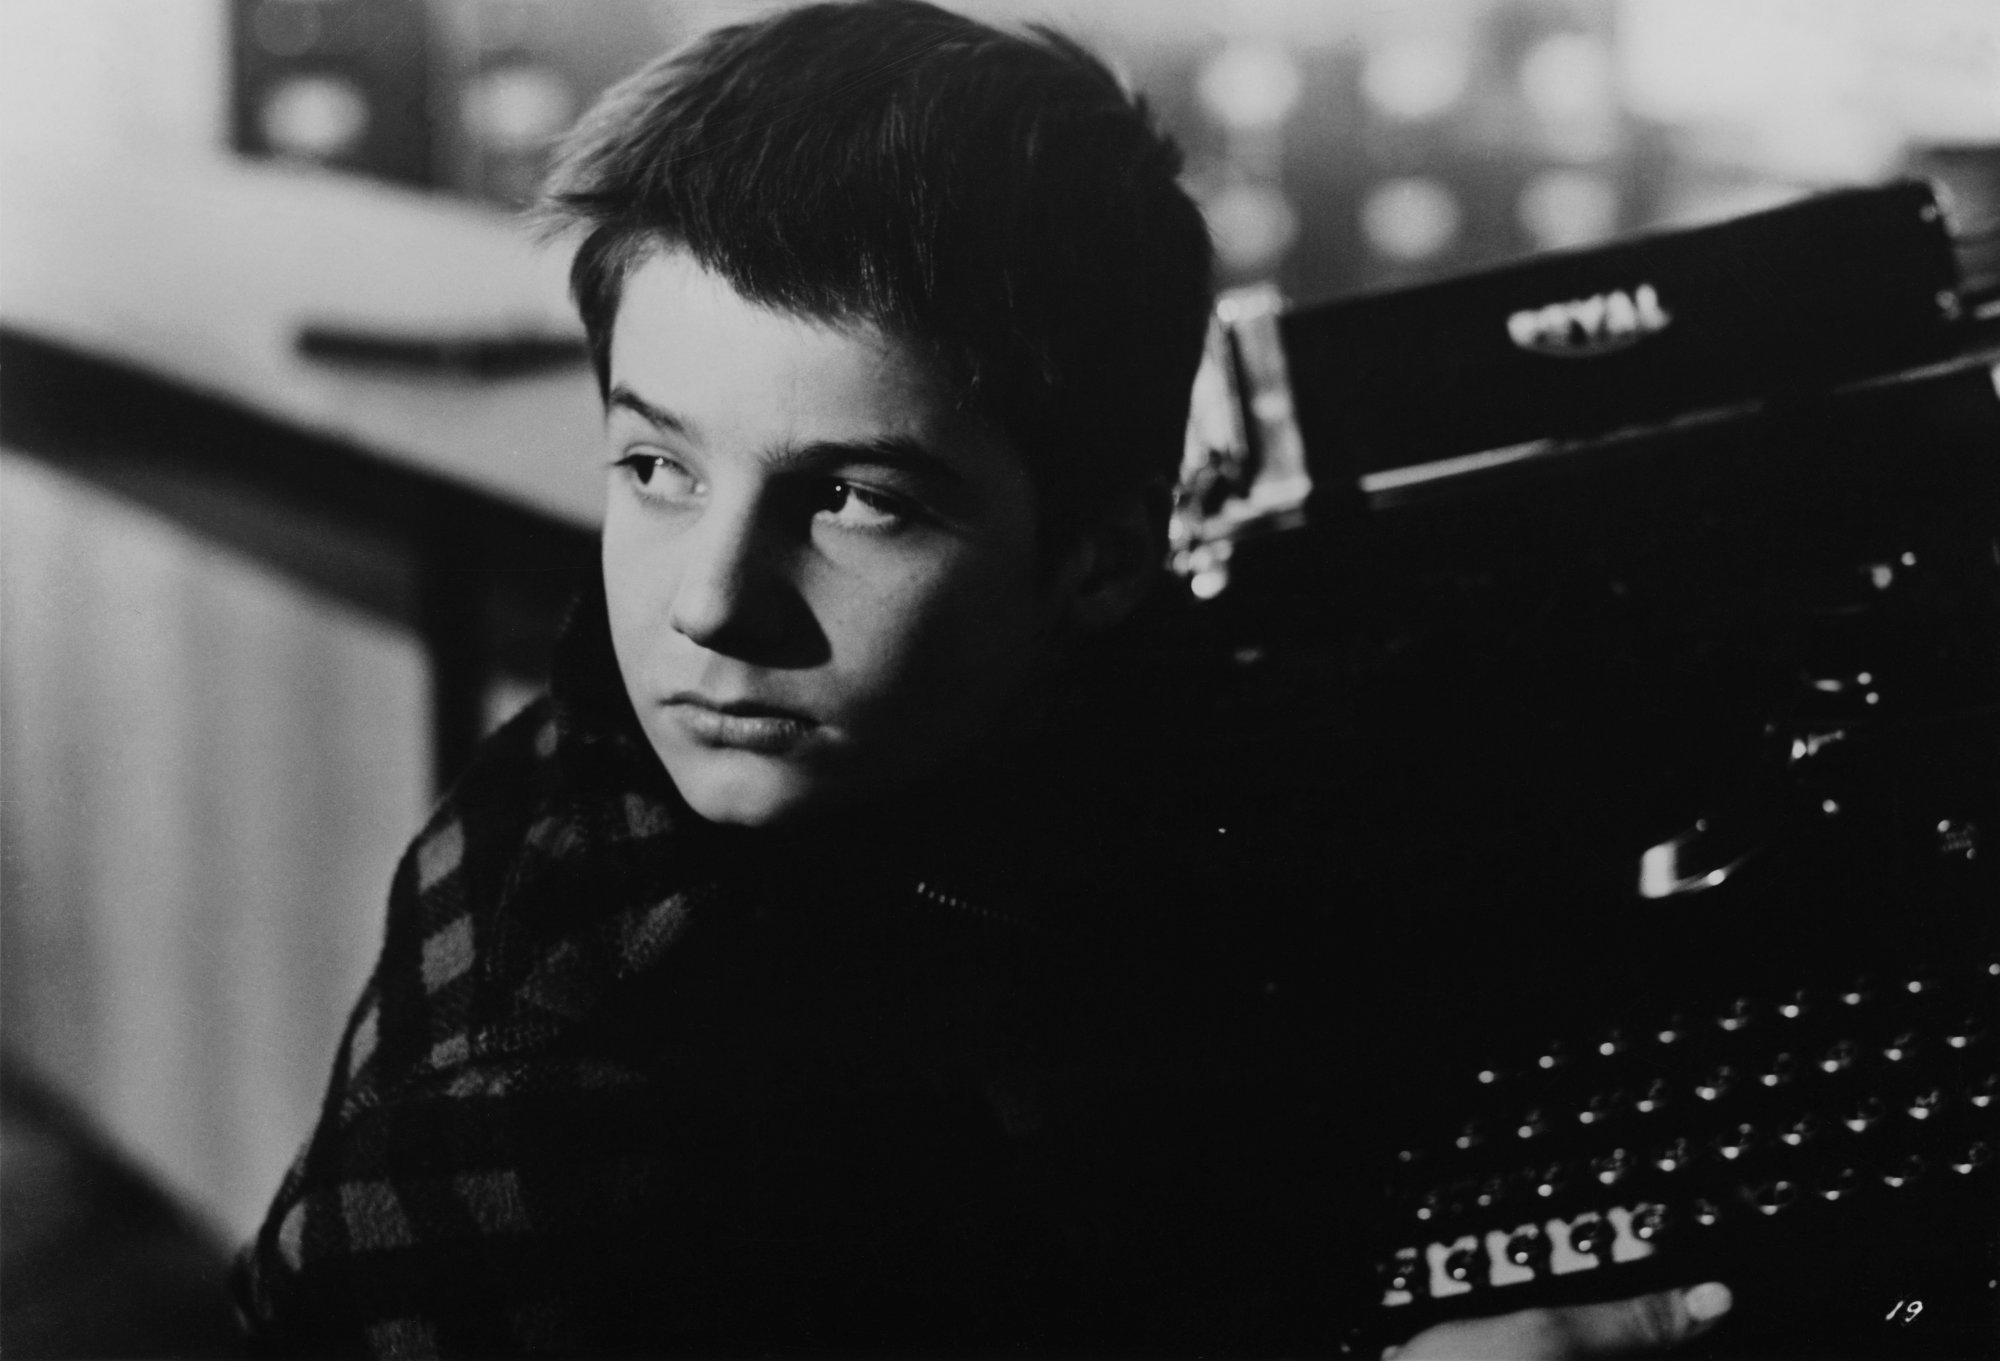 TCM movies 'The 400 Blows' Jean-Pierre Léaud as Antoine Doinel. He's returning a stolen typewriter in a black-and-white picture.